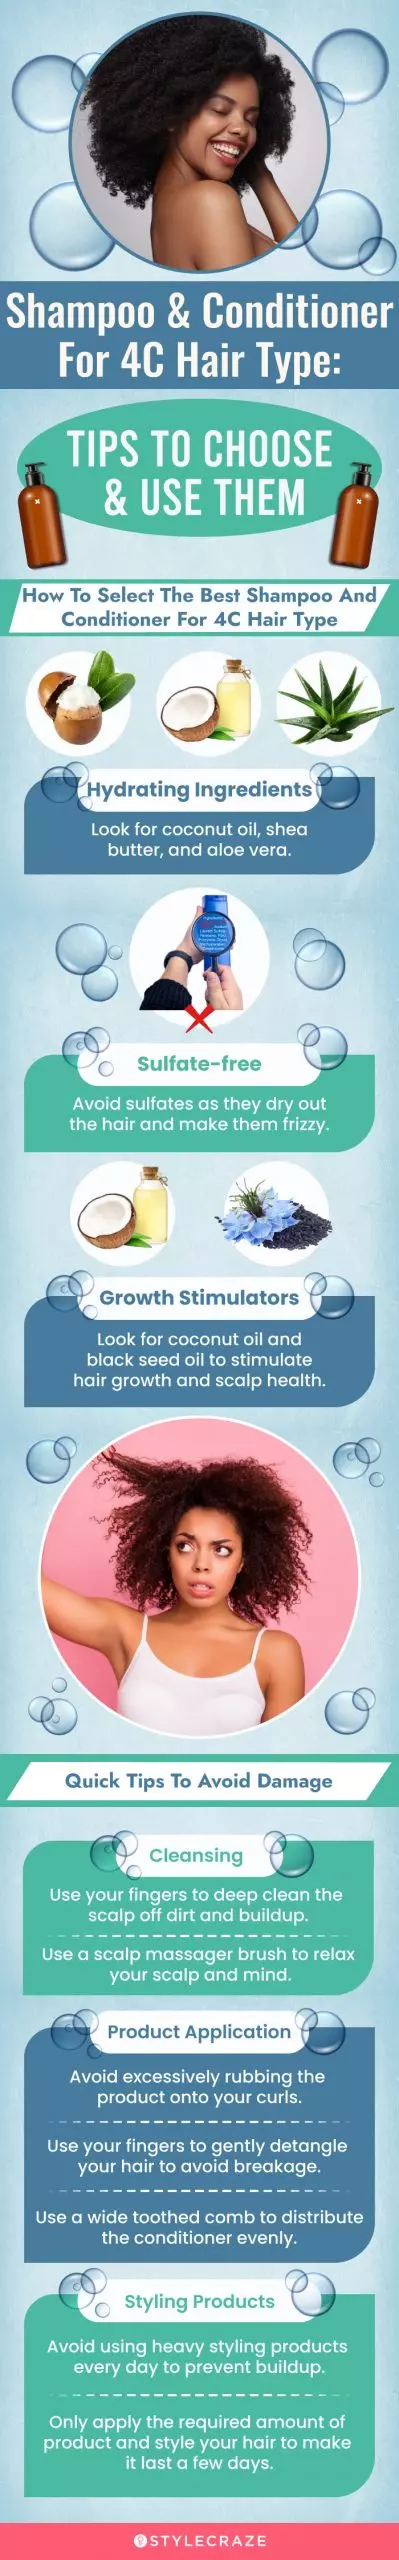 Shampoo & Conditioner For 4C Hair Type: Tips To Choose (infographic)